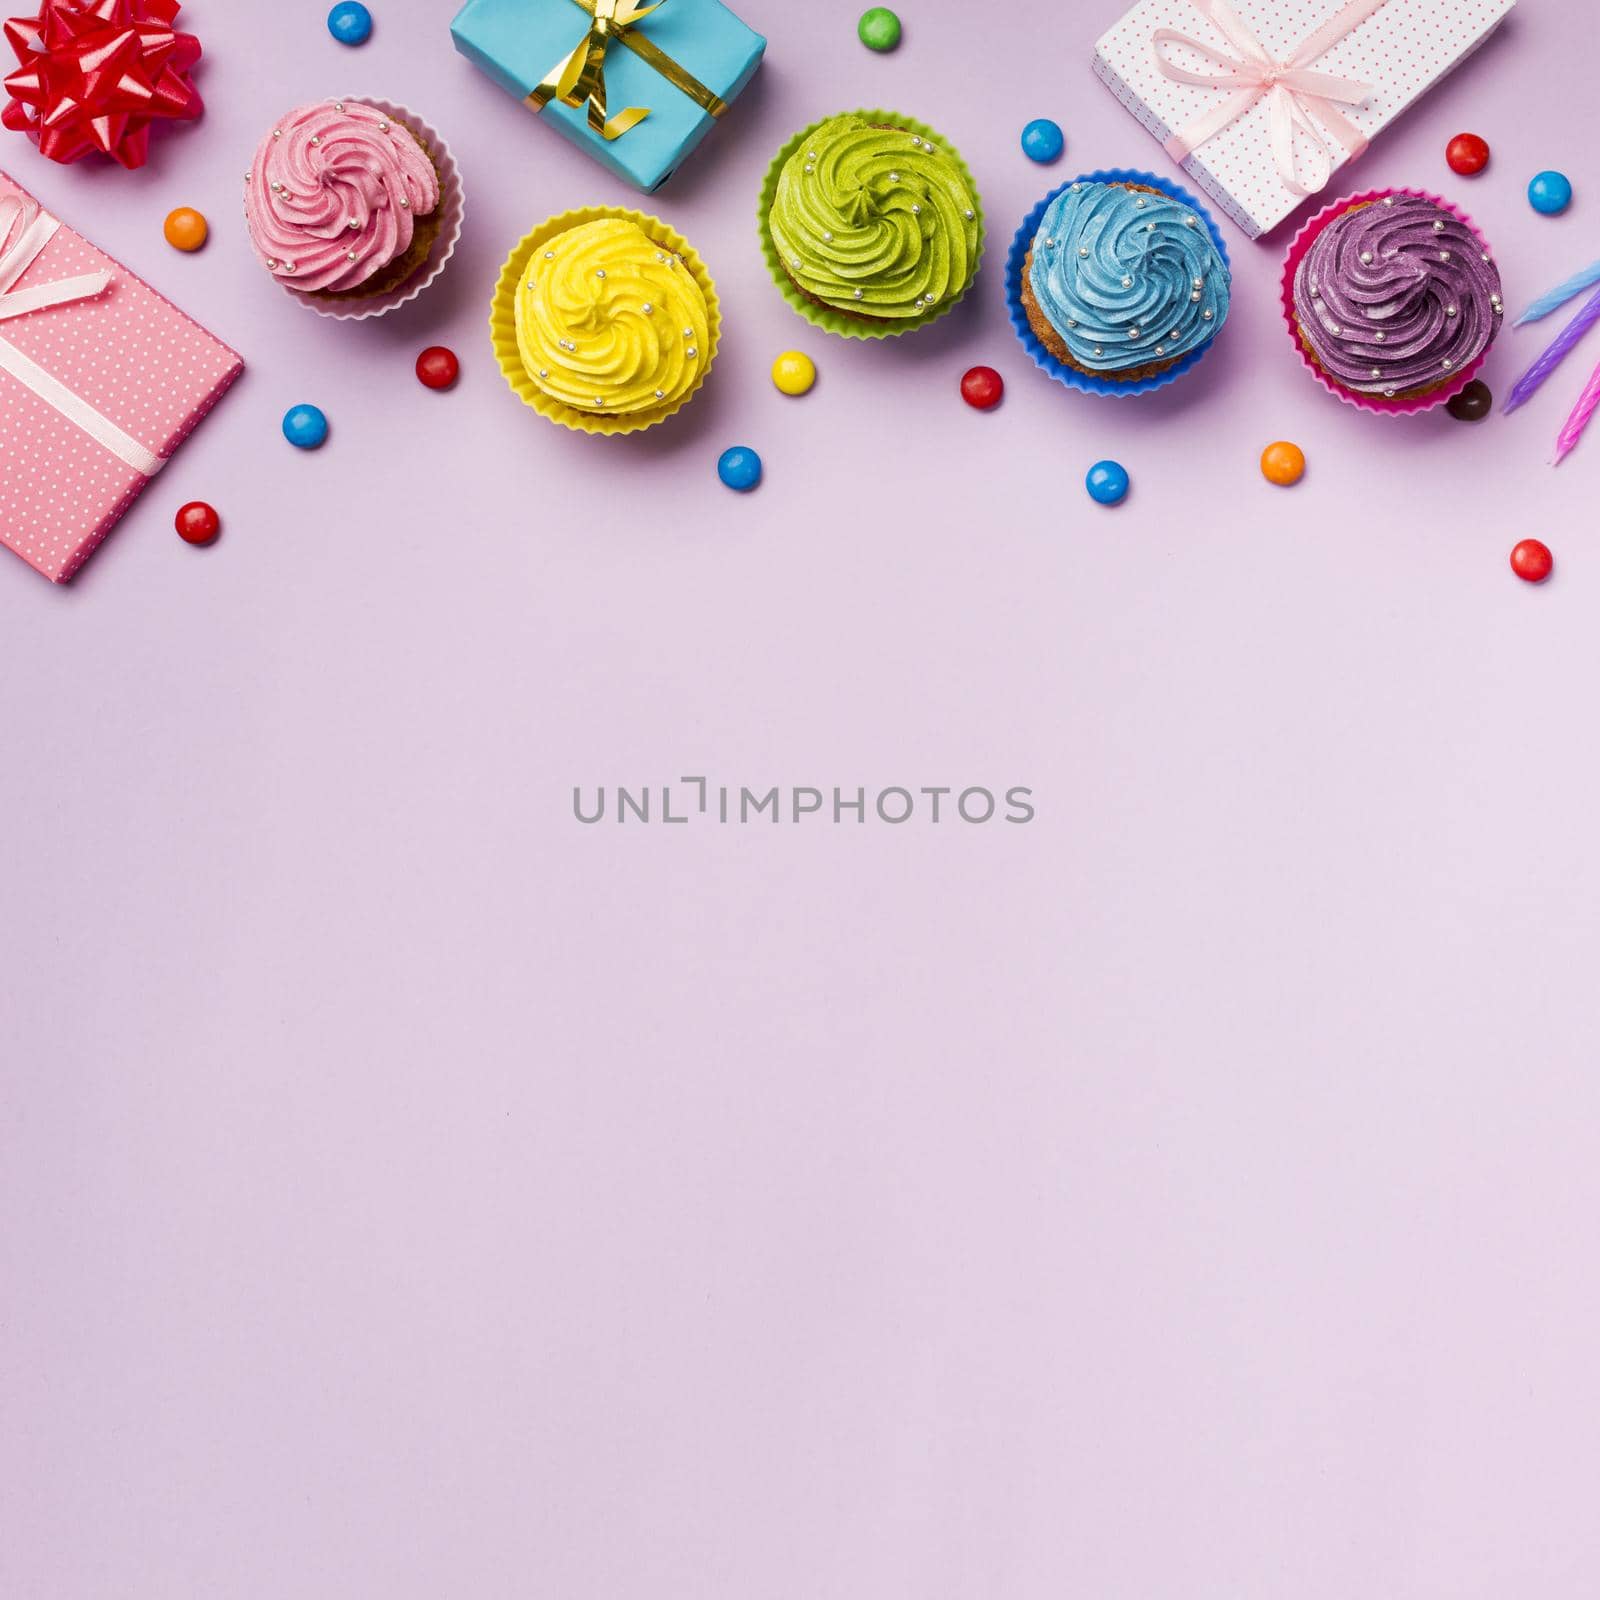 colorful muffins gems with wrapped gift boxes pink backdrop